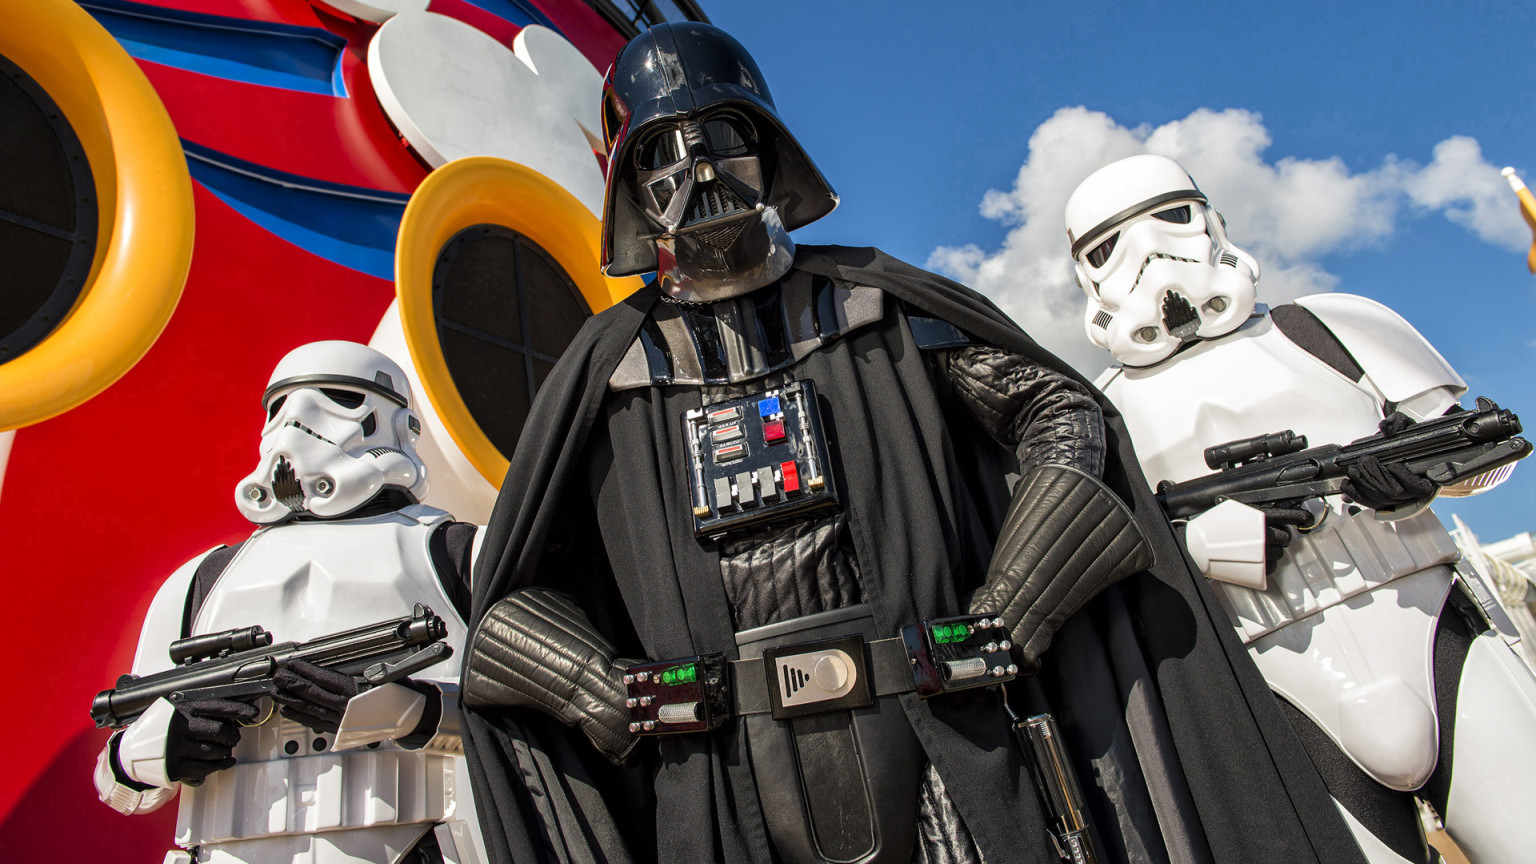 Featured image for “Meet Chewbacca, C-3PO, R2-D2, Darth Vader And More During Star Wars Day At Sea”